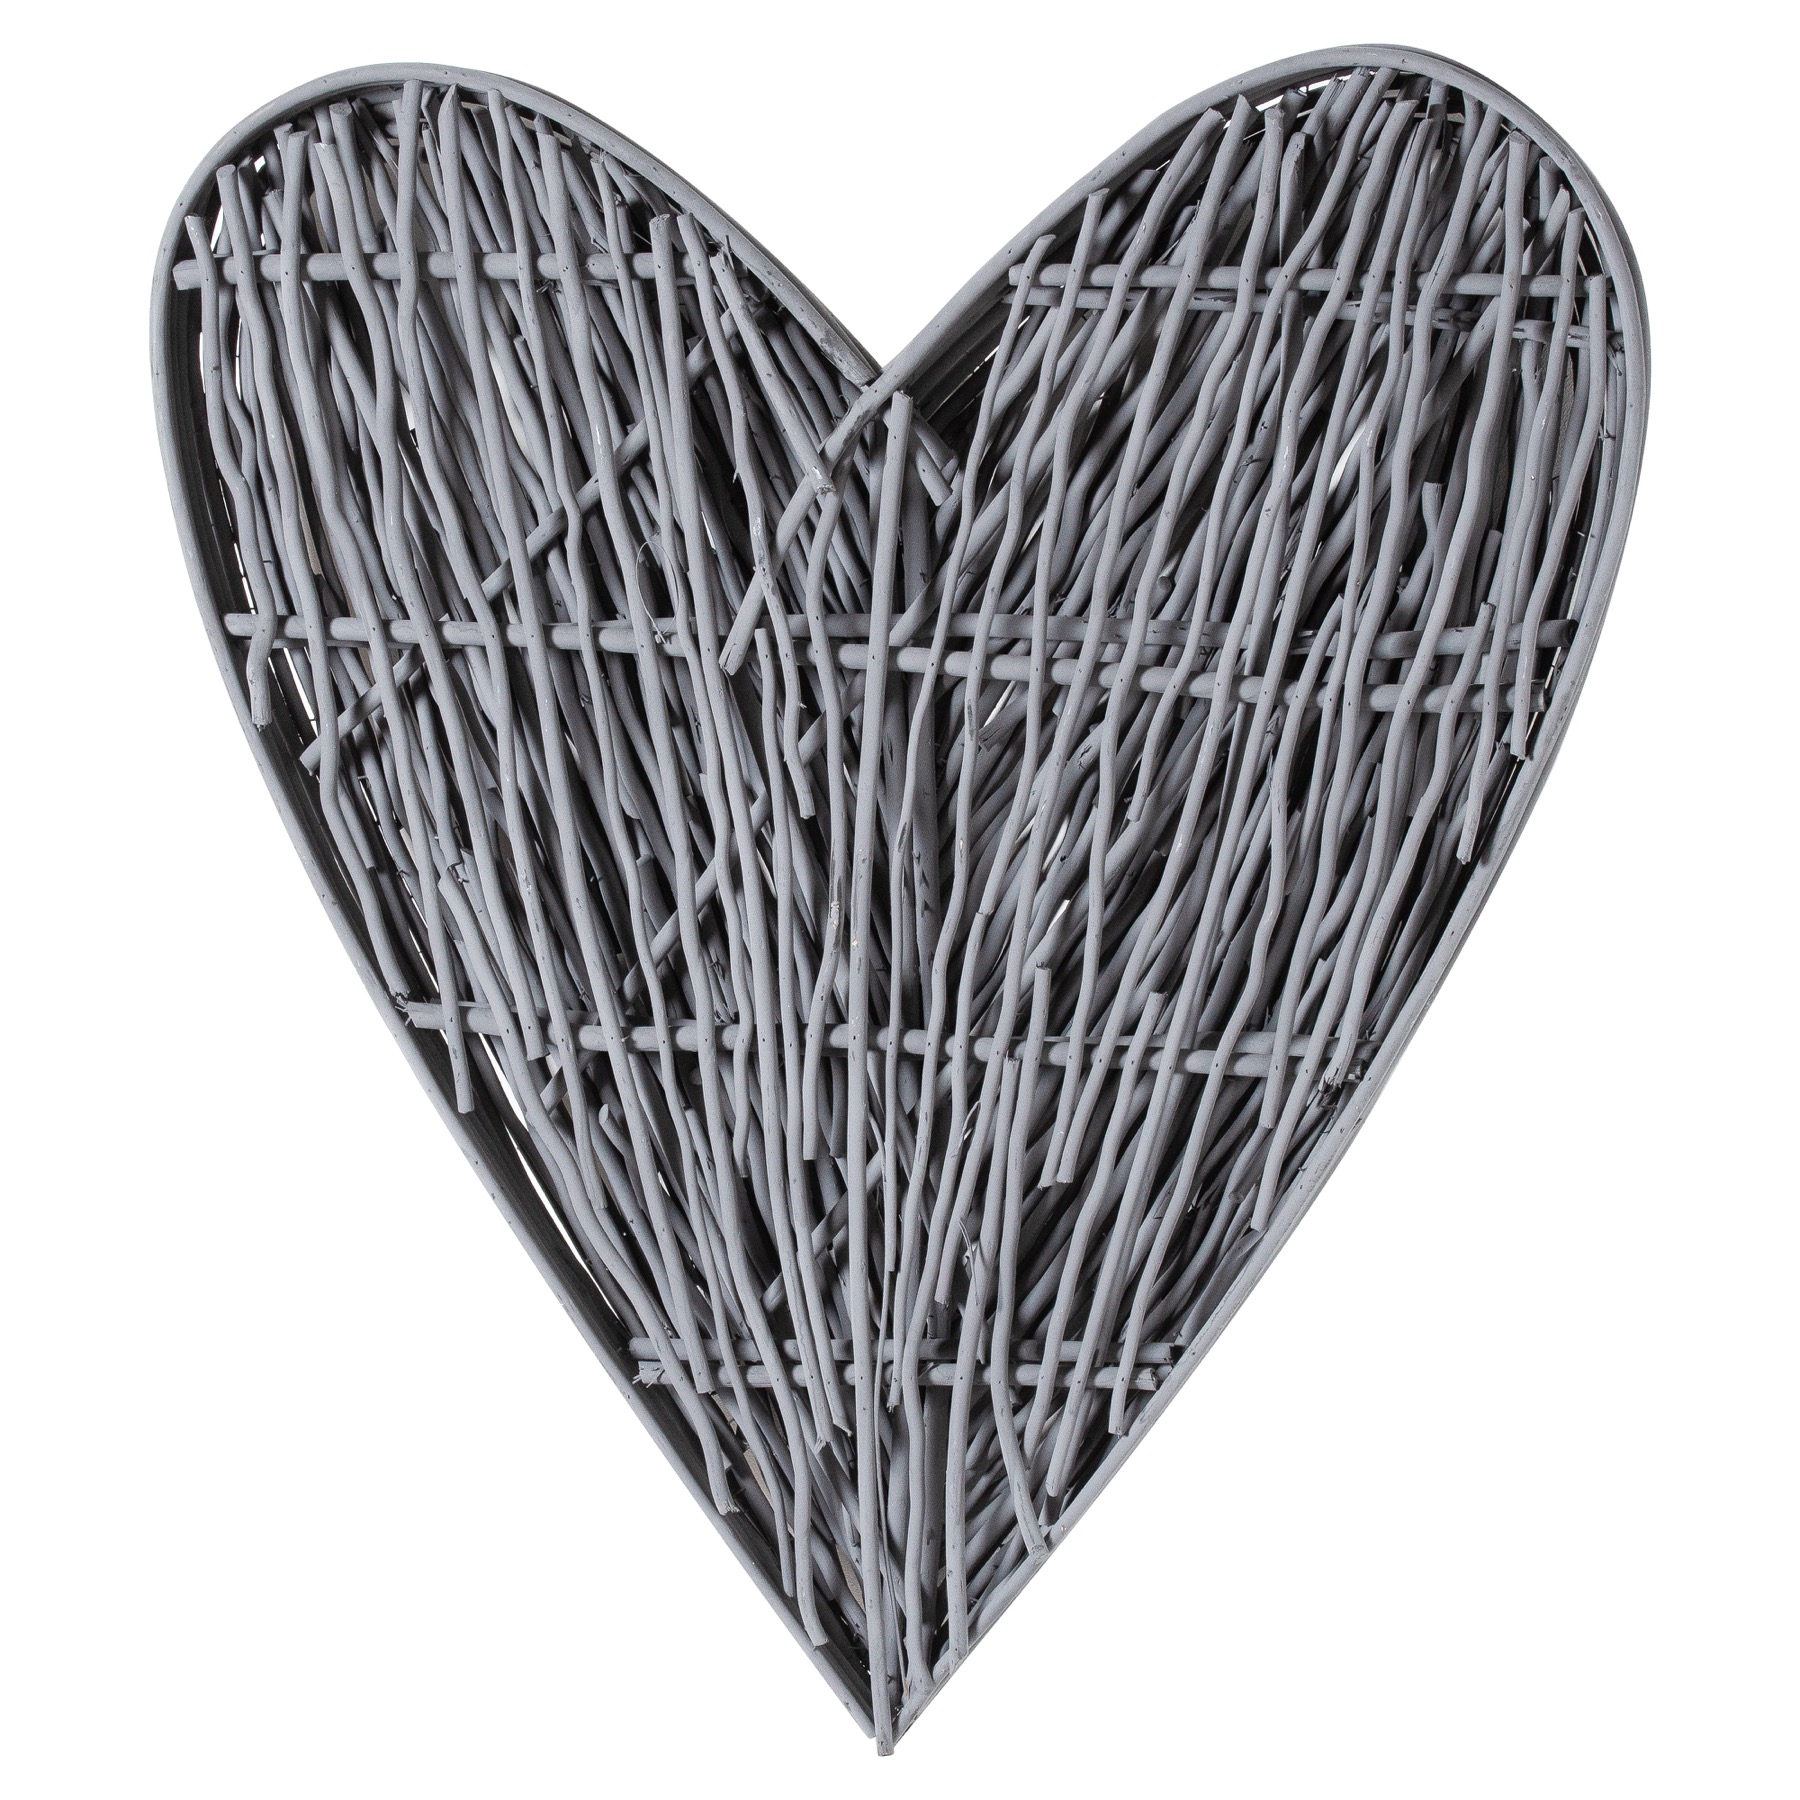 Large Grey Willow Branch Heart - Image 3